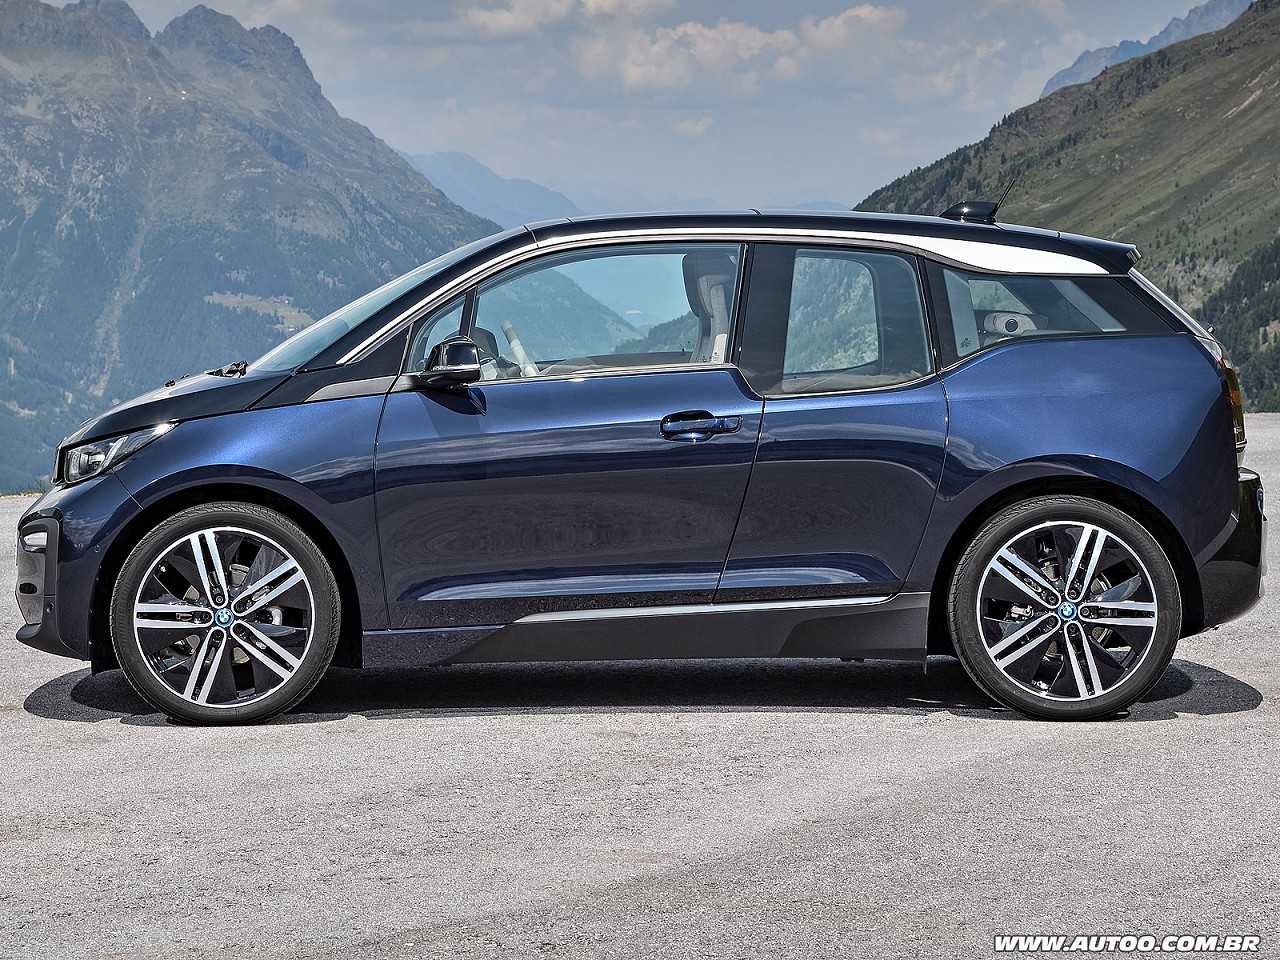 BMWi3 2019 - lateral